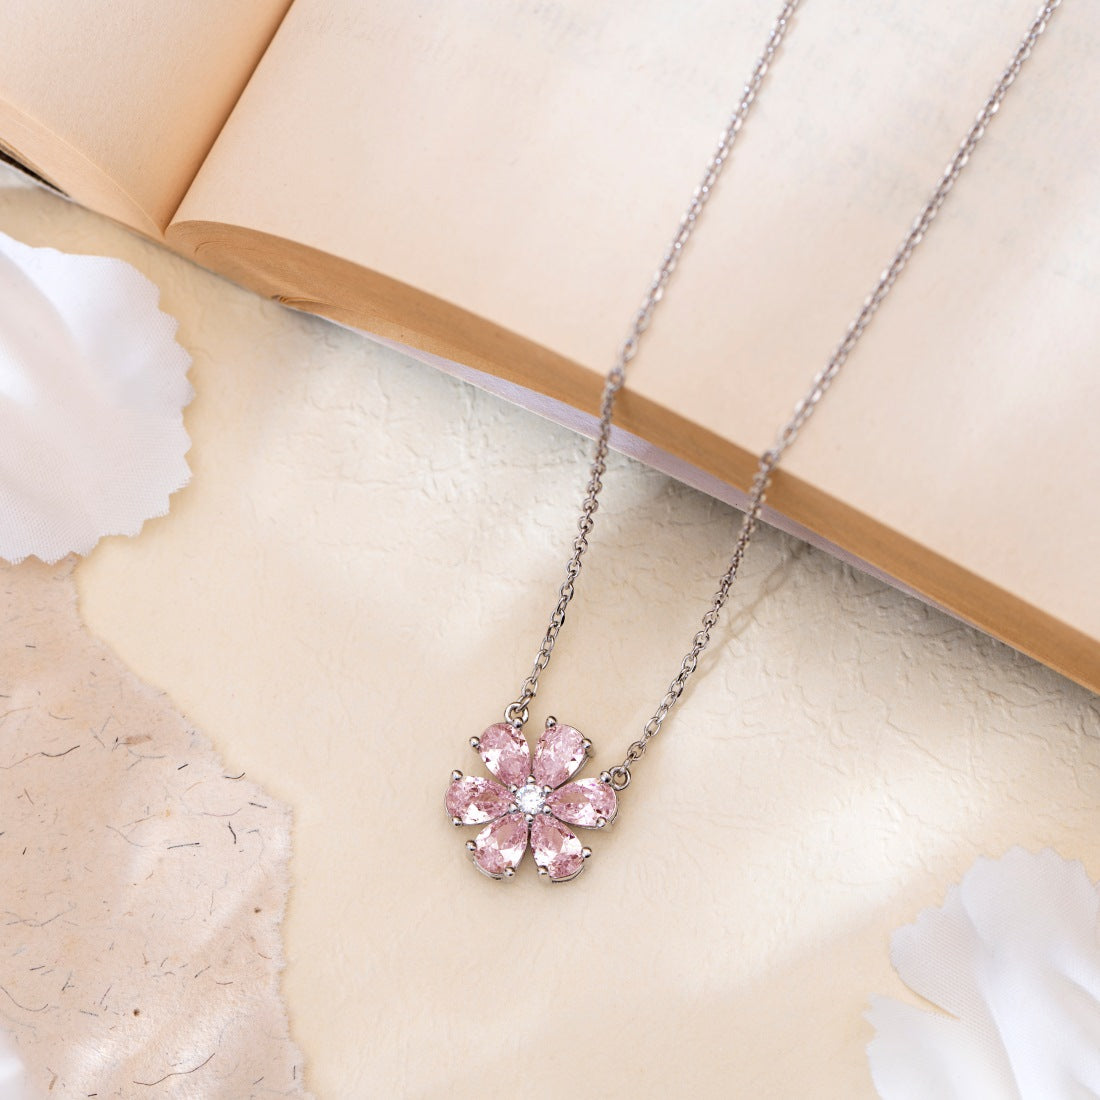 Lustrous Elegance: Rhodium Plated CZ 925 Sterling Silver Necklace